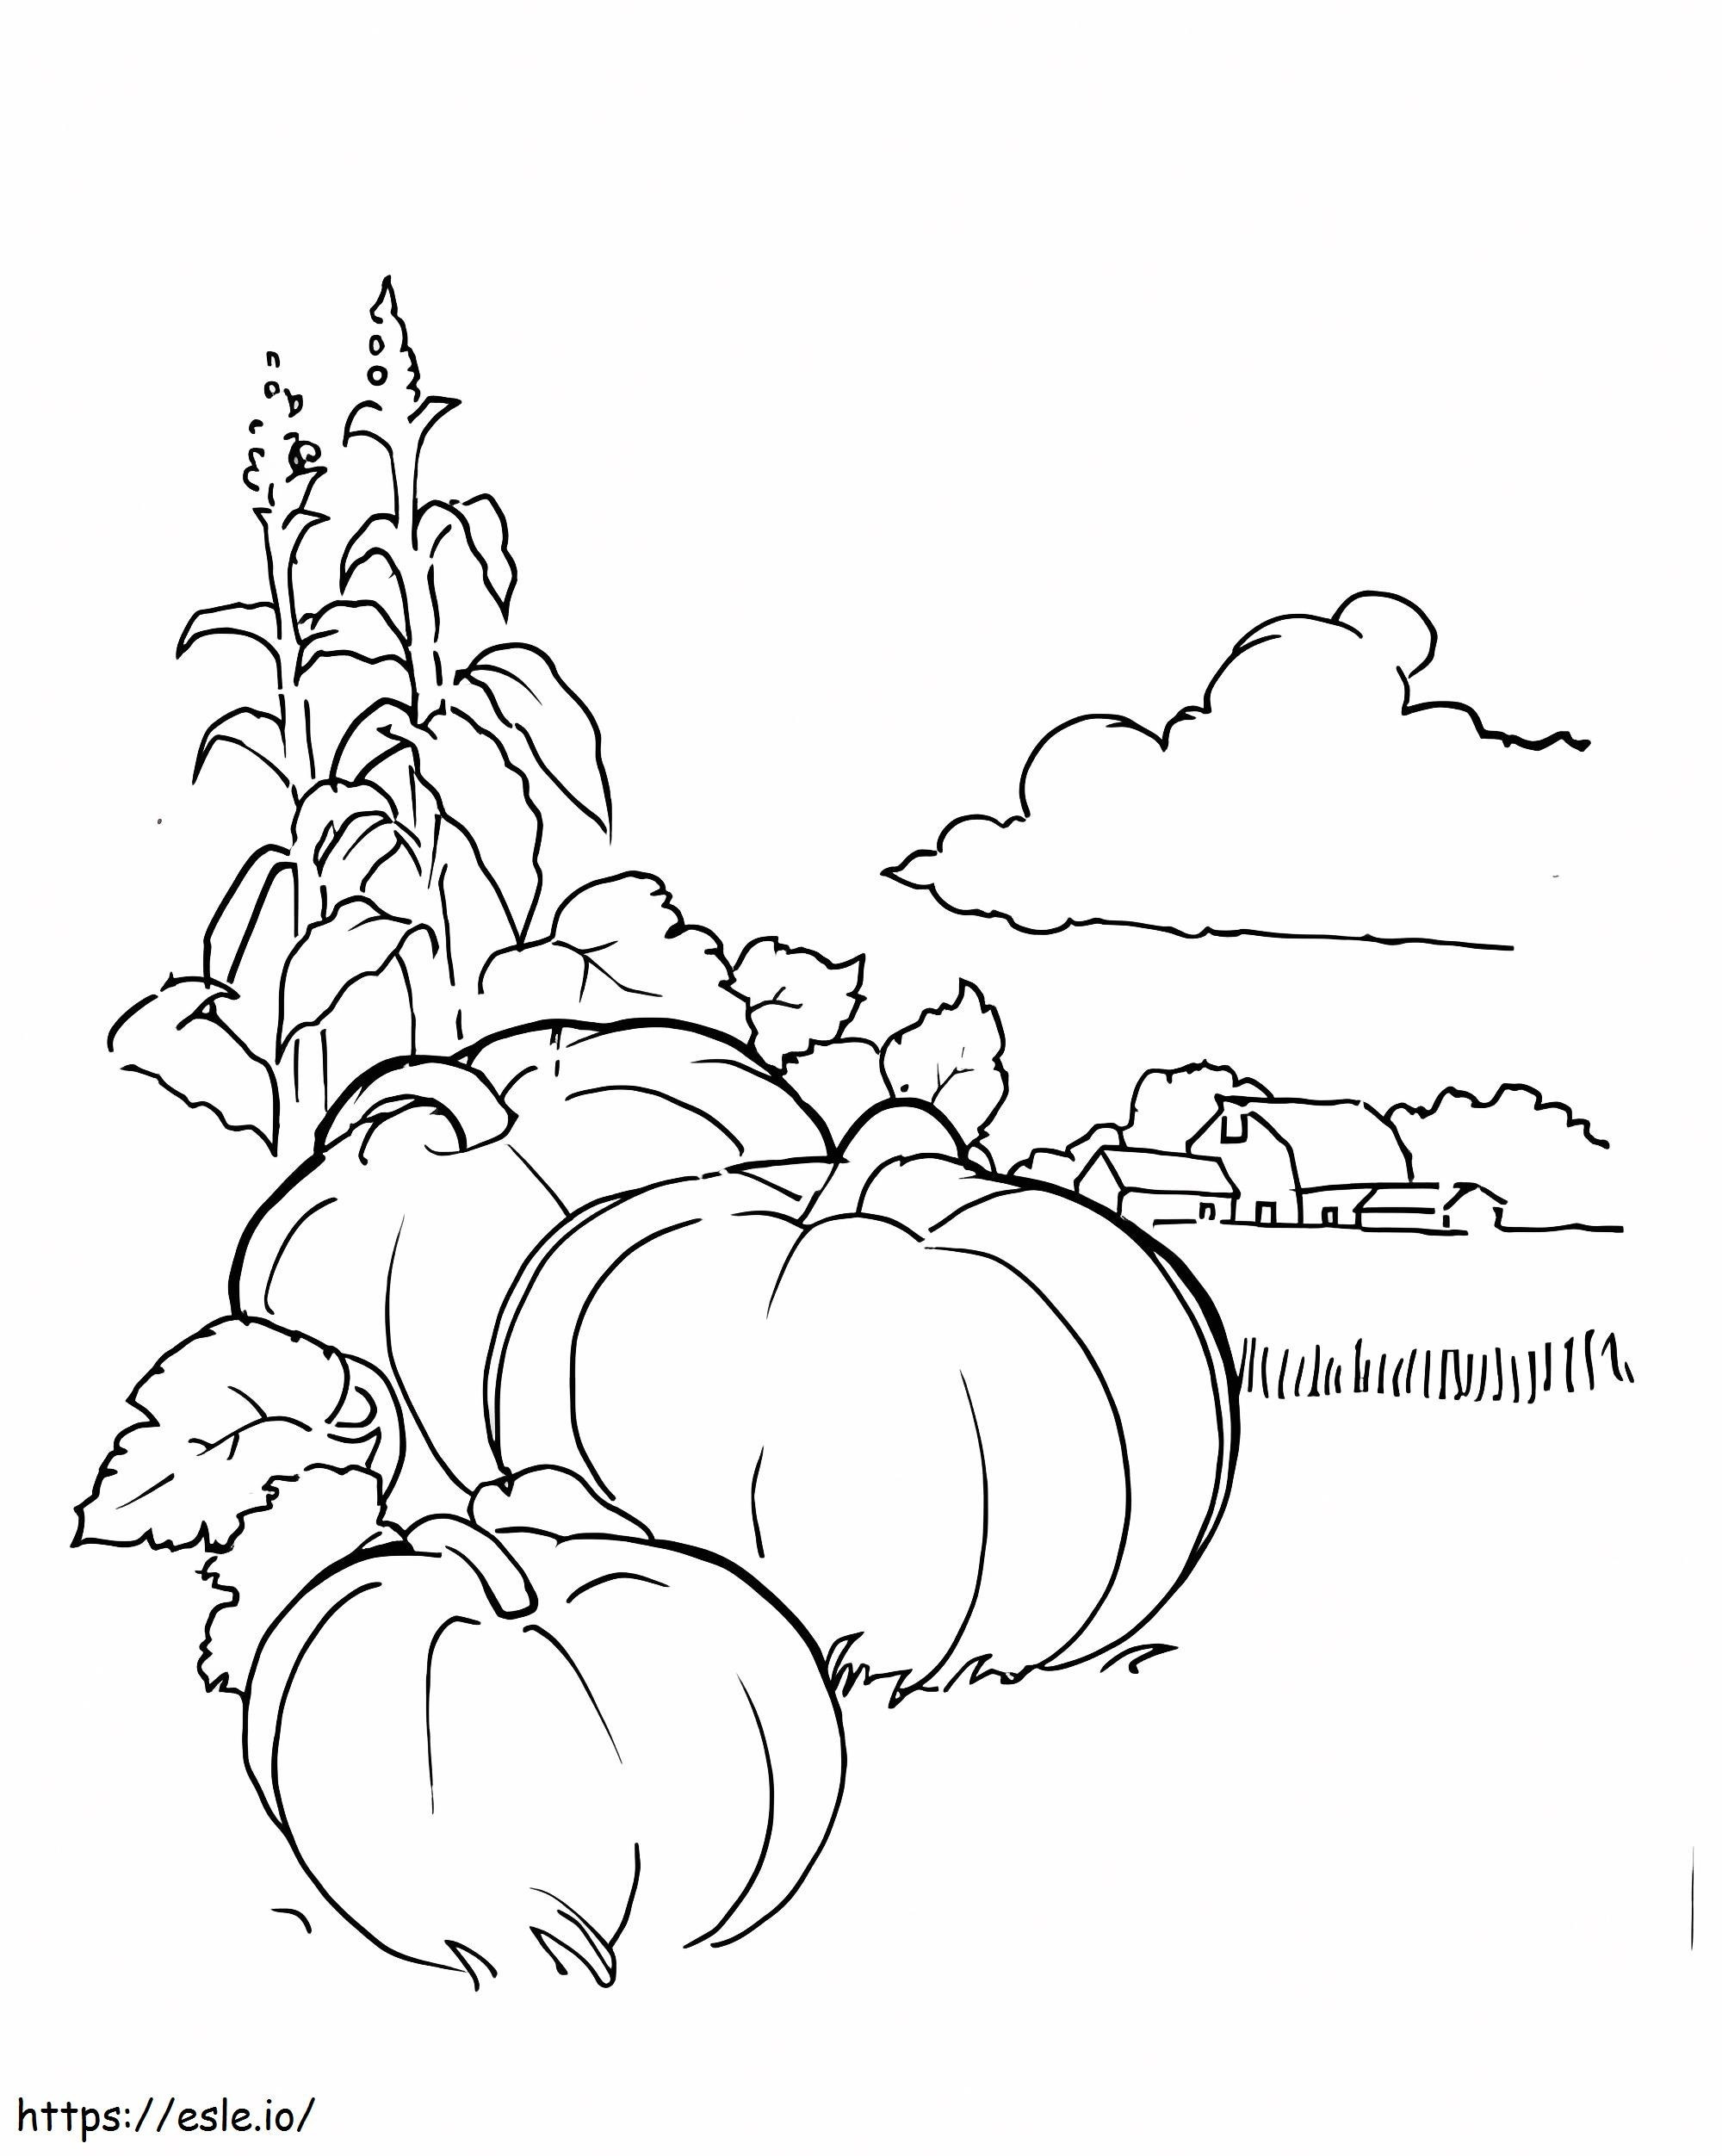 Pumpkin Patch Free To Color coloring page